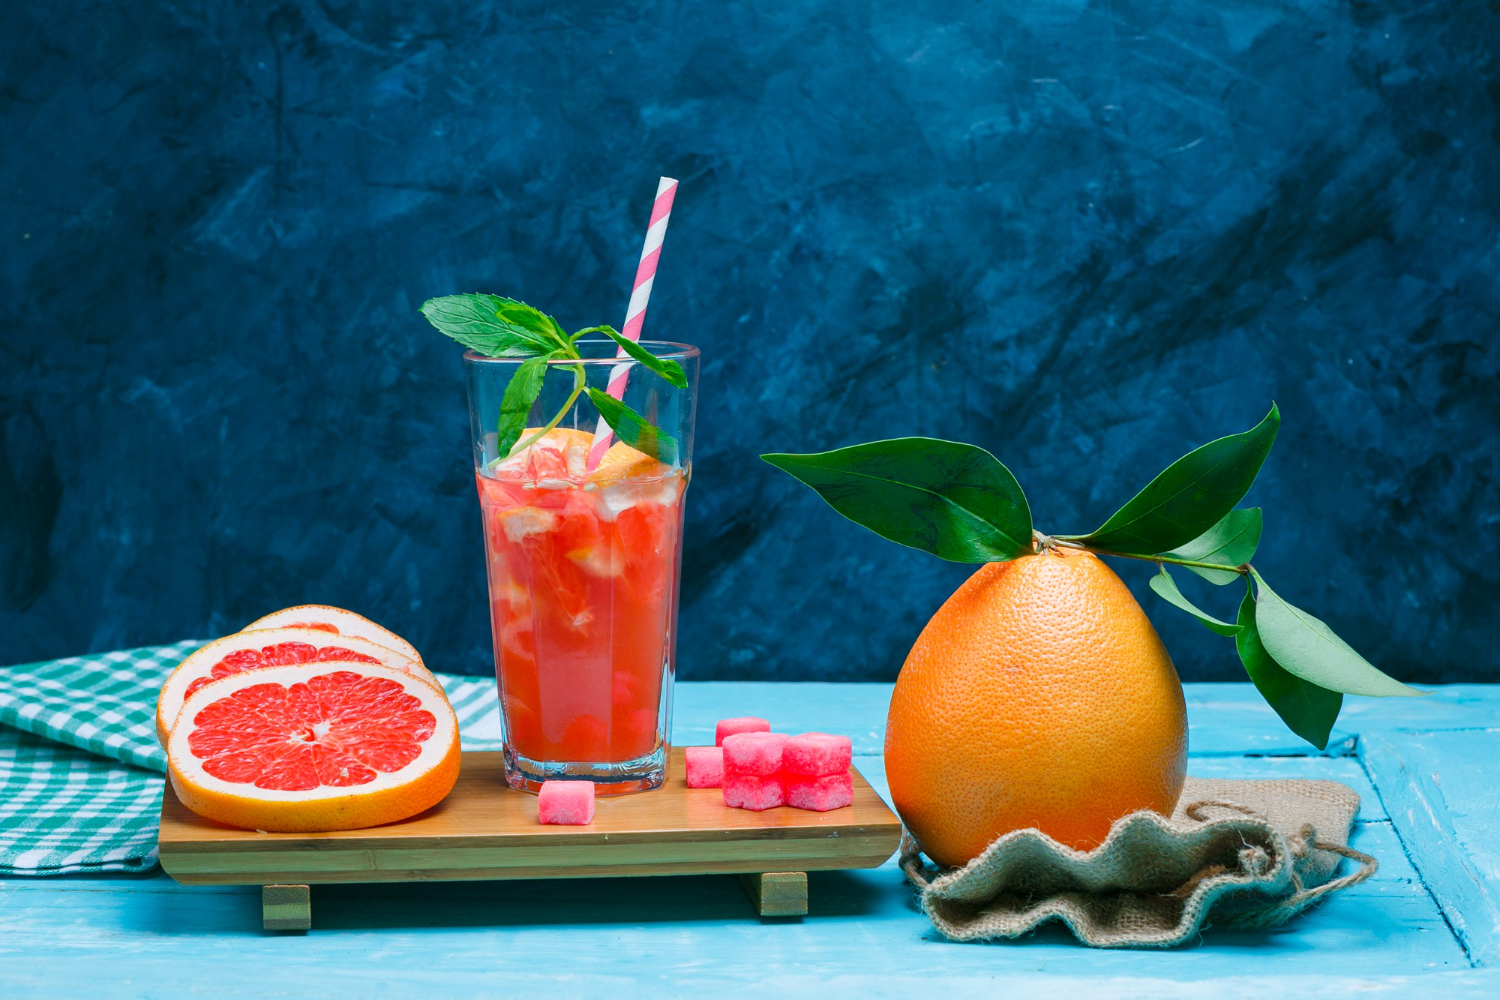 grapefruit drink with picnic cloth